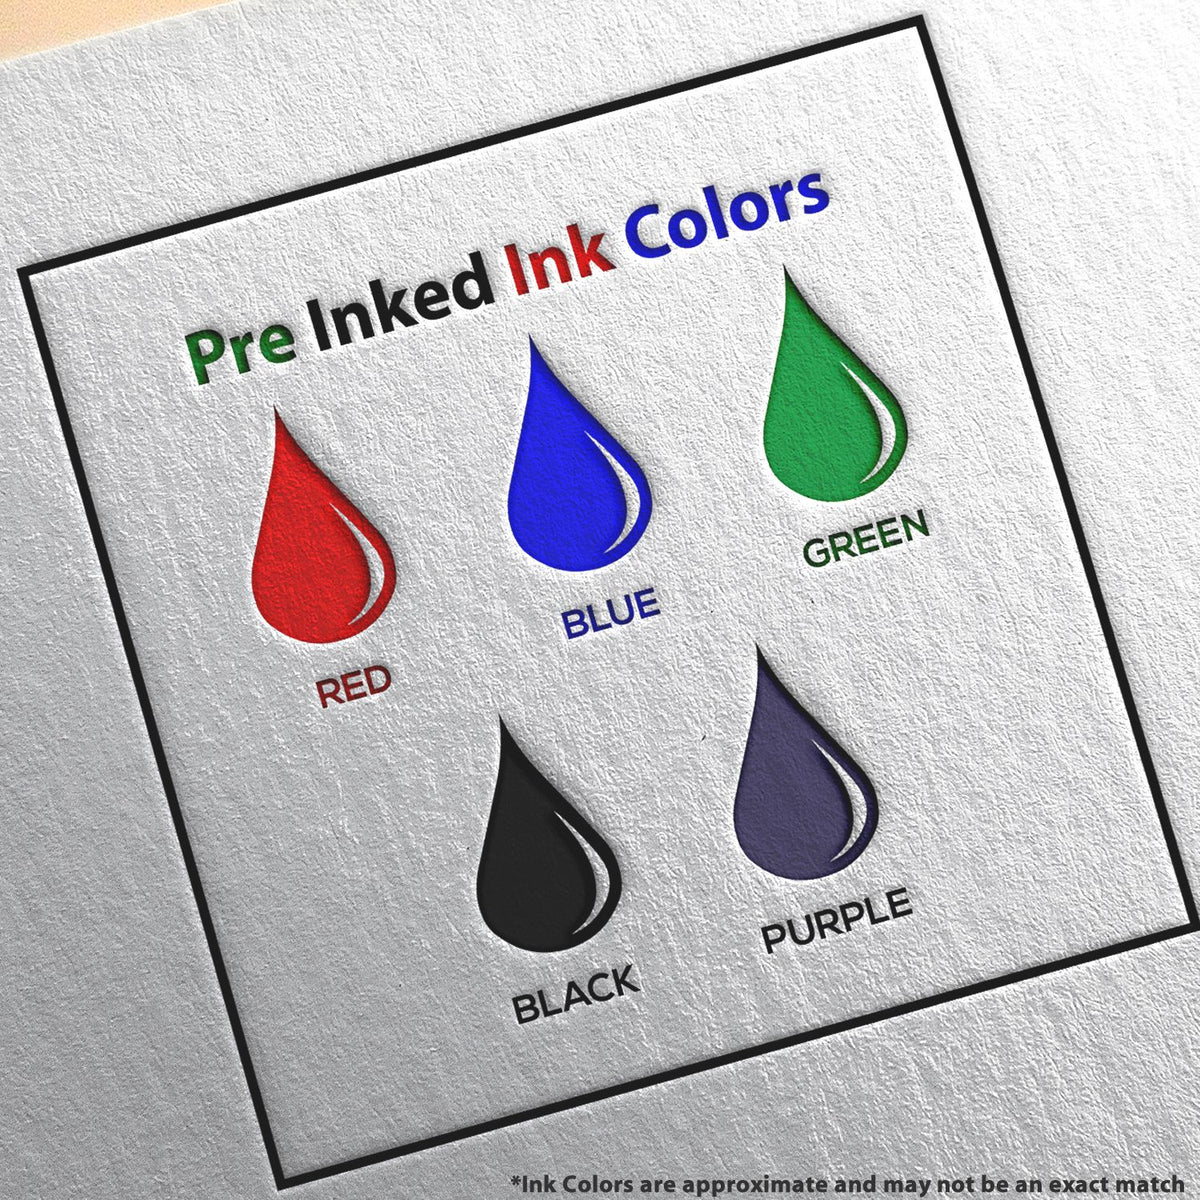 A picture showing the different ink colors or hues available for the Slim Pre-Inked Maryland Architect Seal Stamp product.